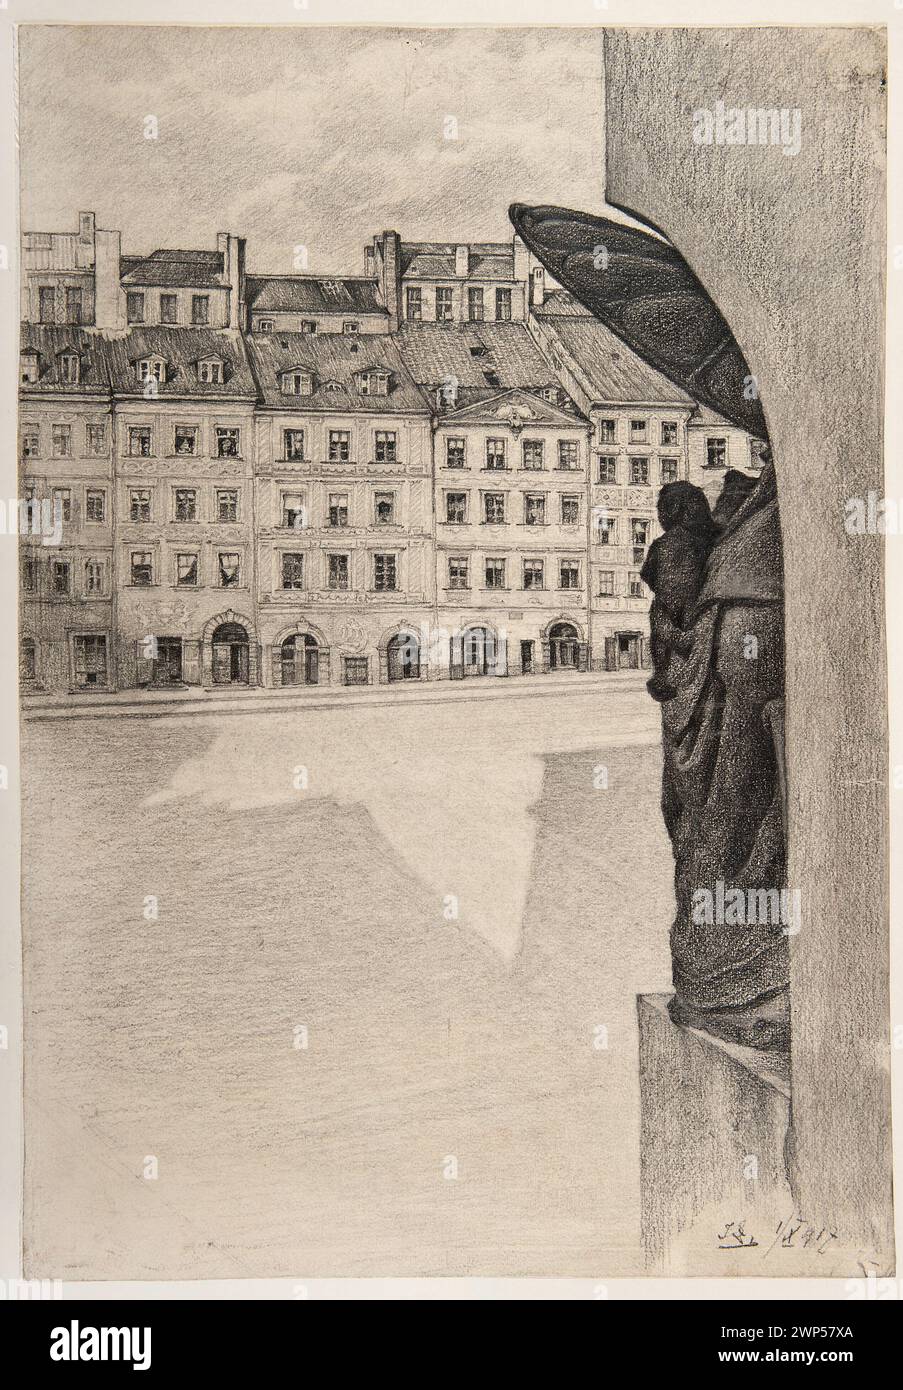 Study for graphics 'Old market from the tenement house XX. Mazowieckie '; Care, Ignacy (1865-1941); 1917 (1917-00-00-1917-00-00);Young Poland (Styl), Old Town Square (Warsaw), Warsaw (Masovian Voivodeship), Kamienica under St. Anna (Warsaw), Kamienice, unknown (provenance), Poland (culture), Polish drawings, sculptures, graphics studies Stock Photo